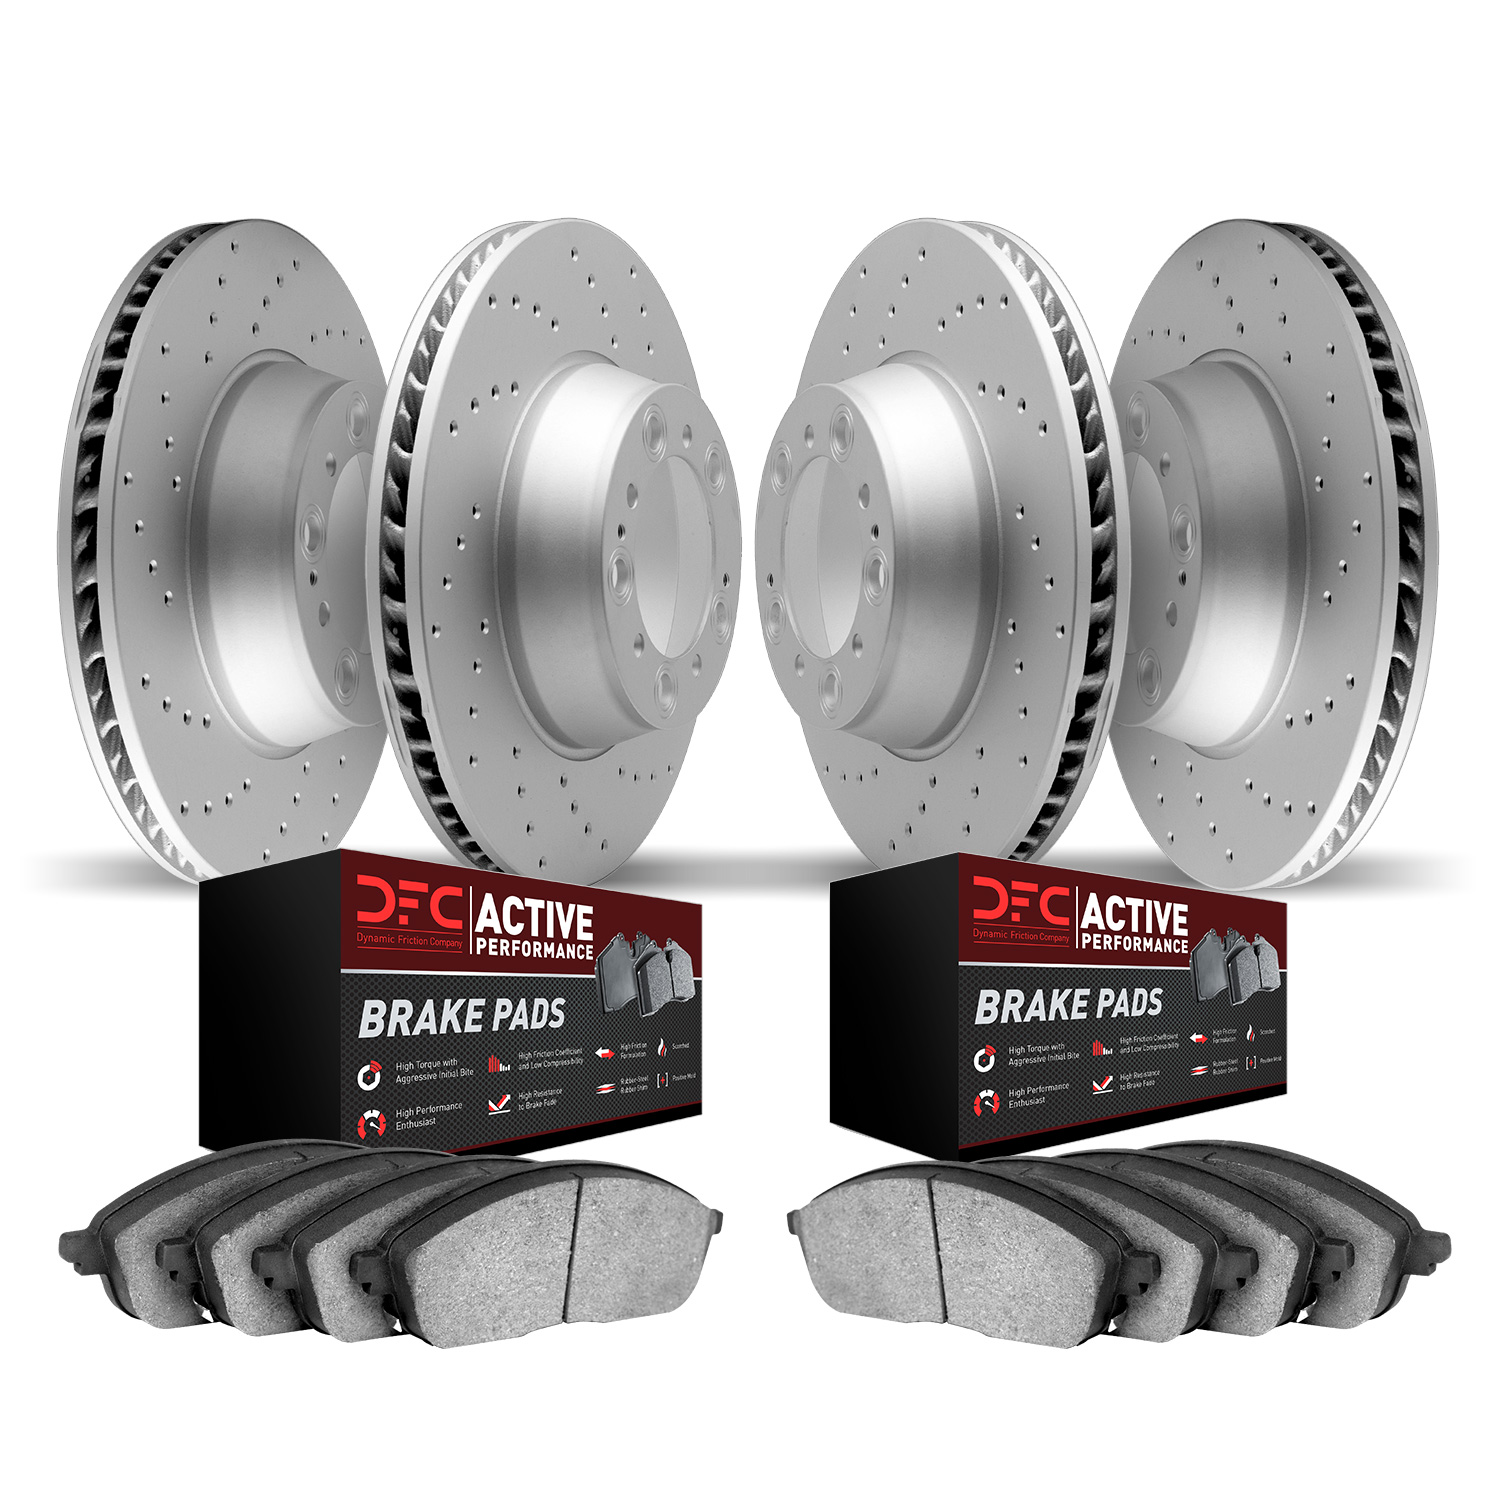 2704-52000 Geoperformance Drilled Brake Rotors with Active Performance Pads Kit, 2008-2009 GM, Position: Front and Rear